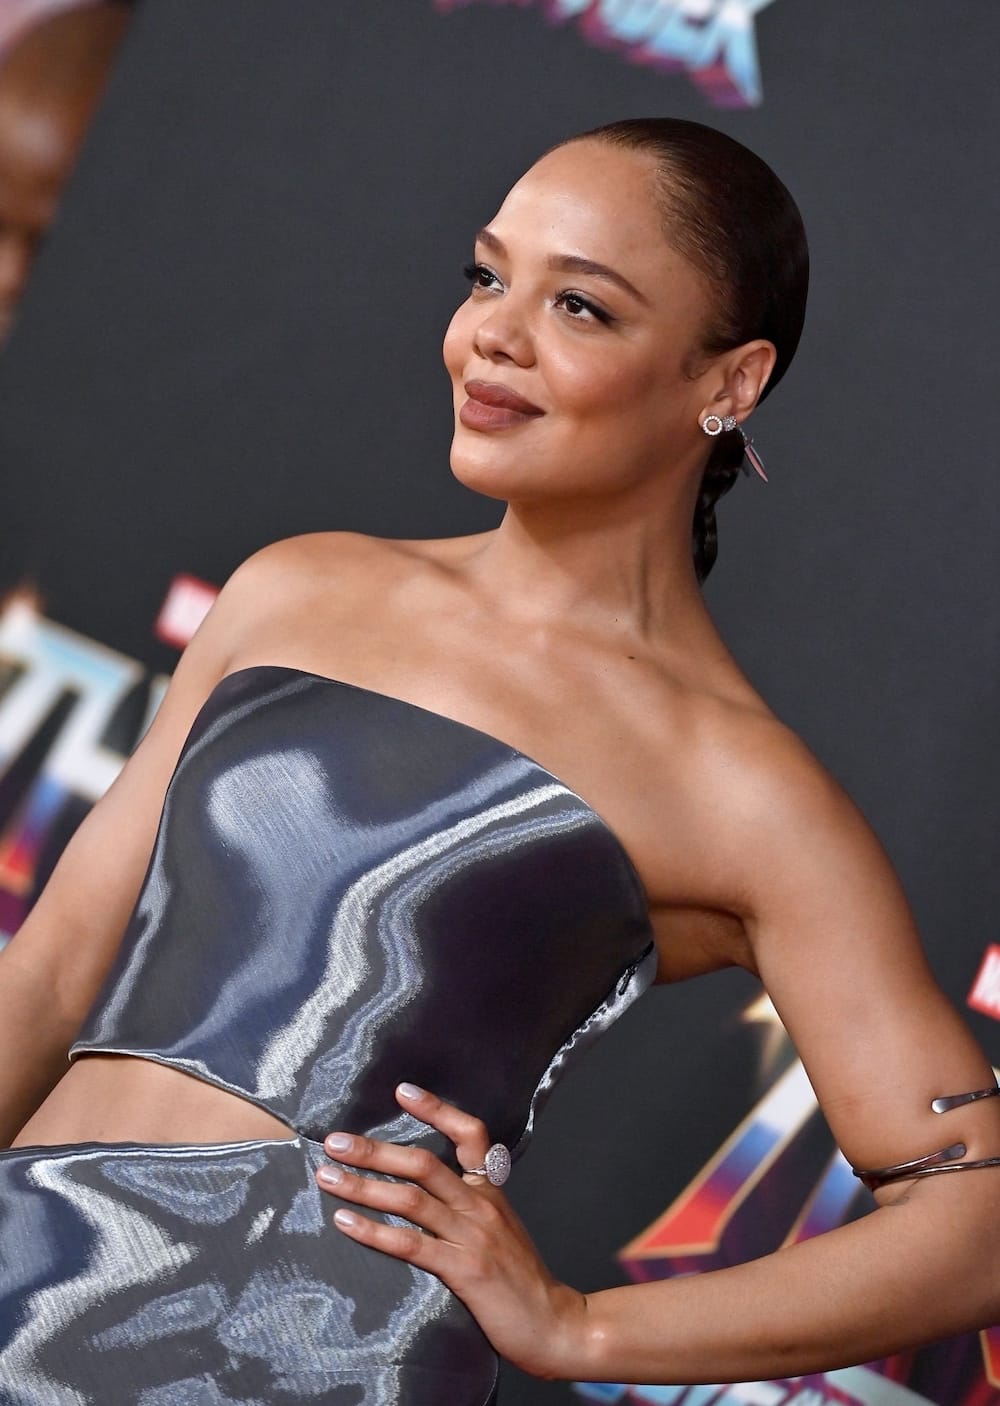 Tessa Thompson in Armani Prive Dress at ‘Thor: Love and Thunder’ World Premiere 2022